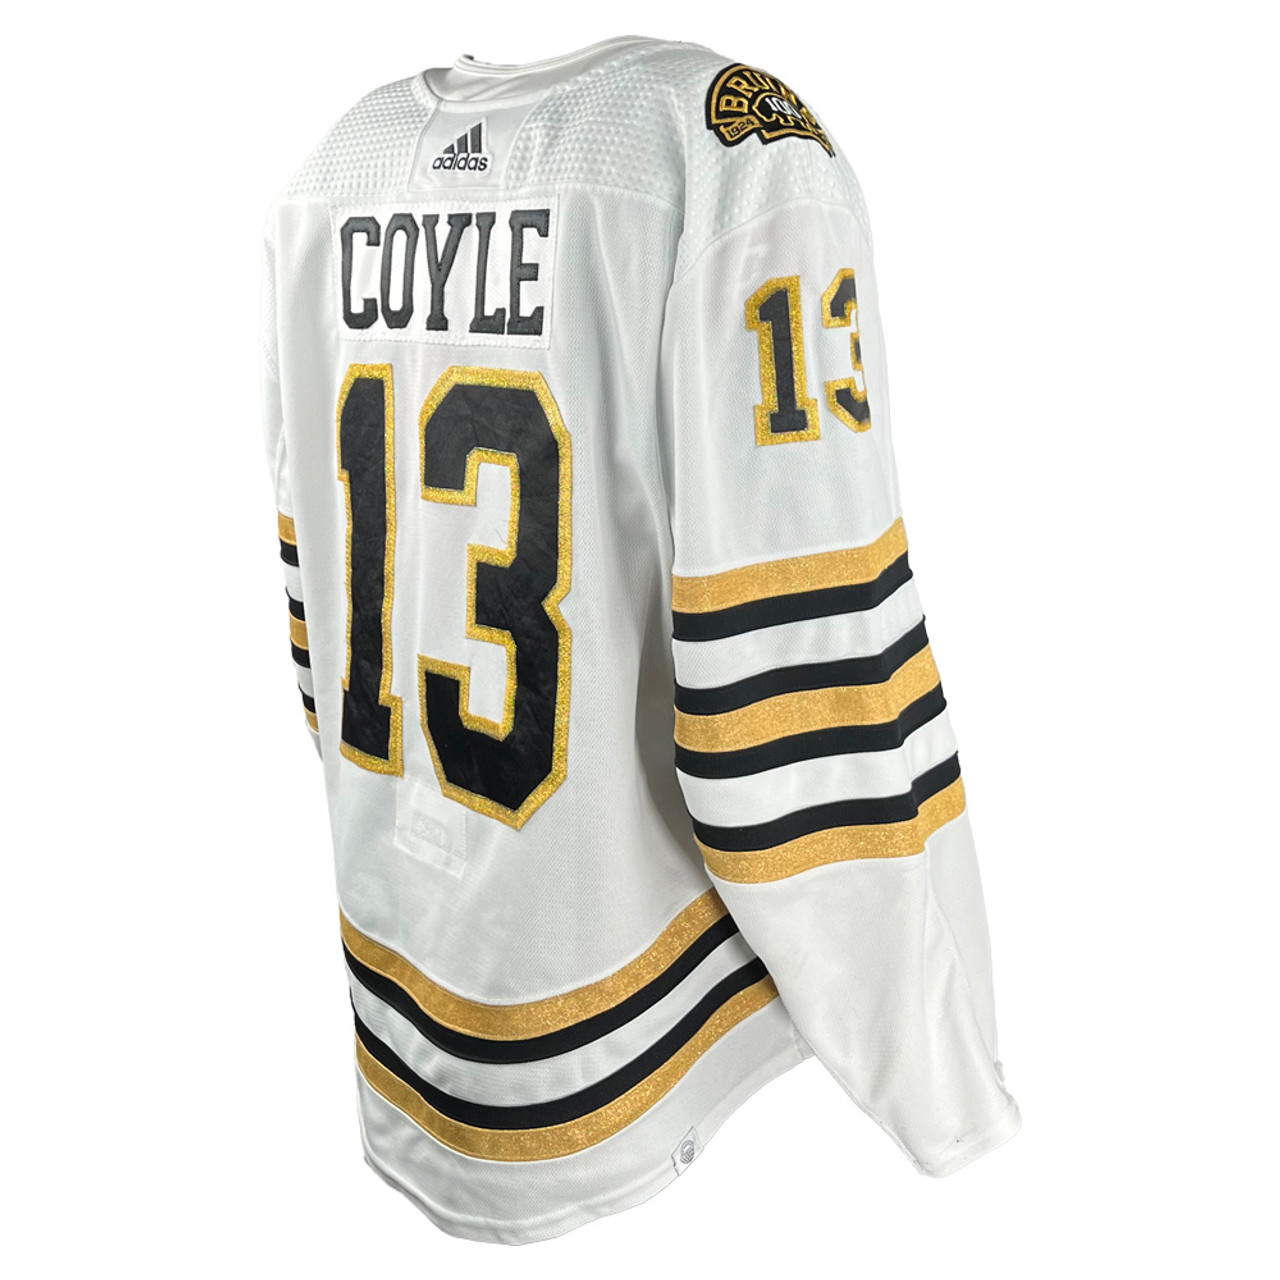 charlie coyle winter classic jersey